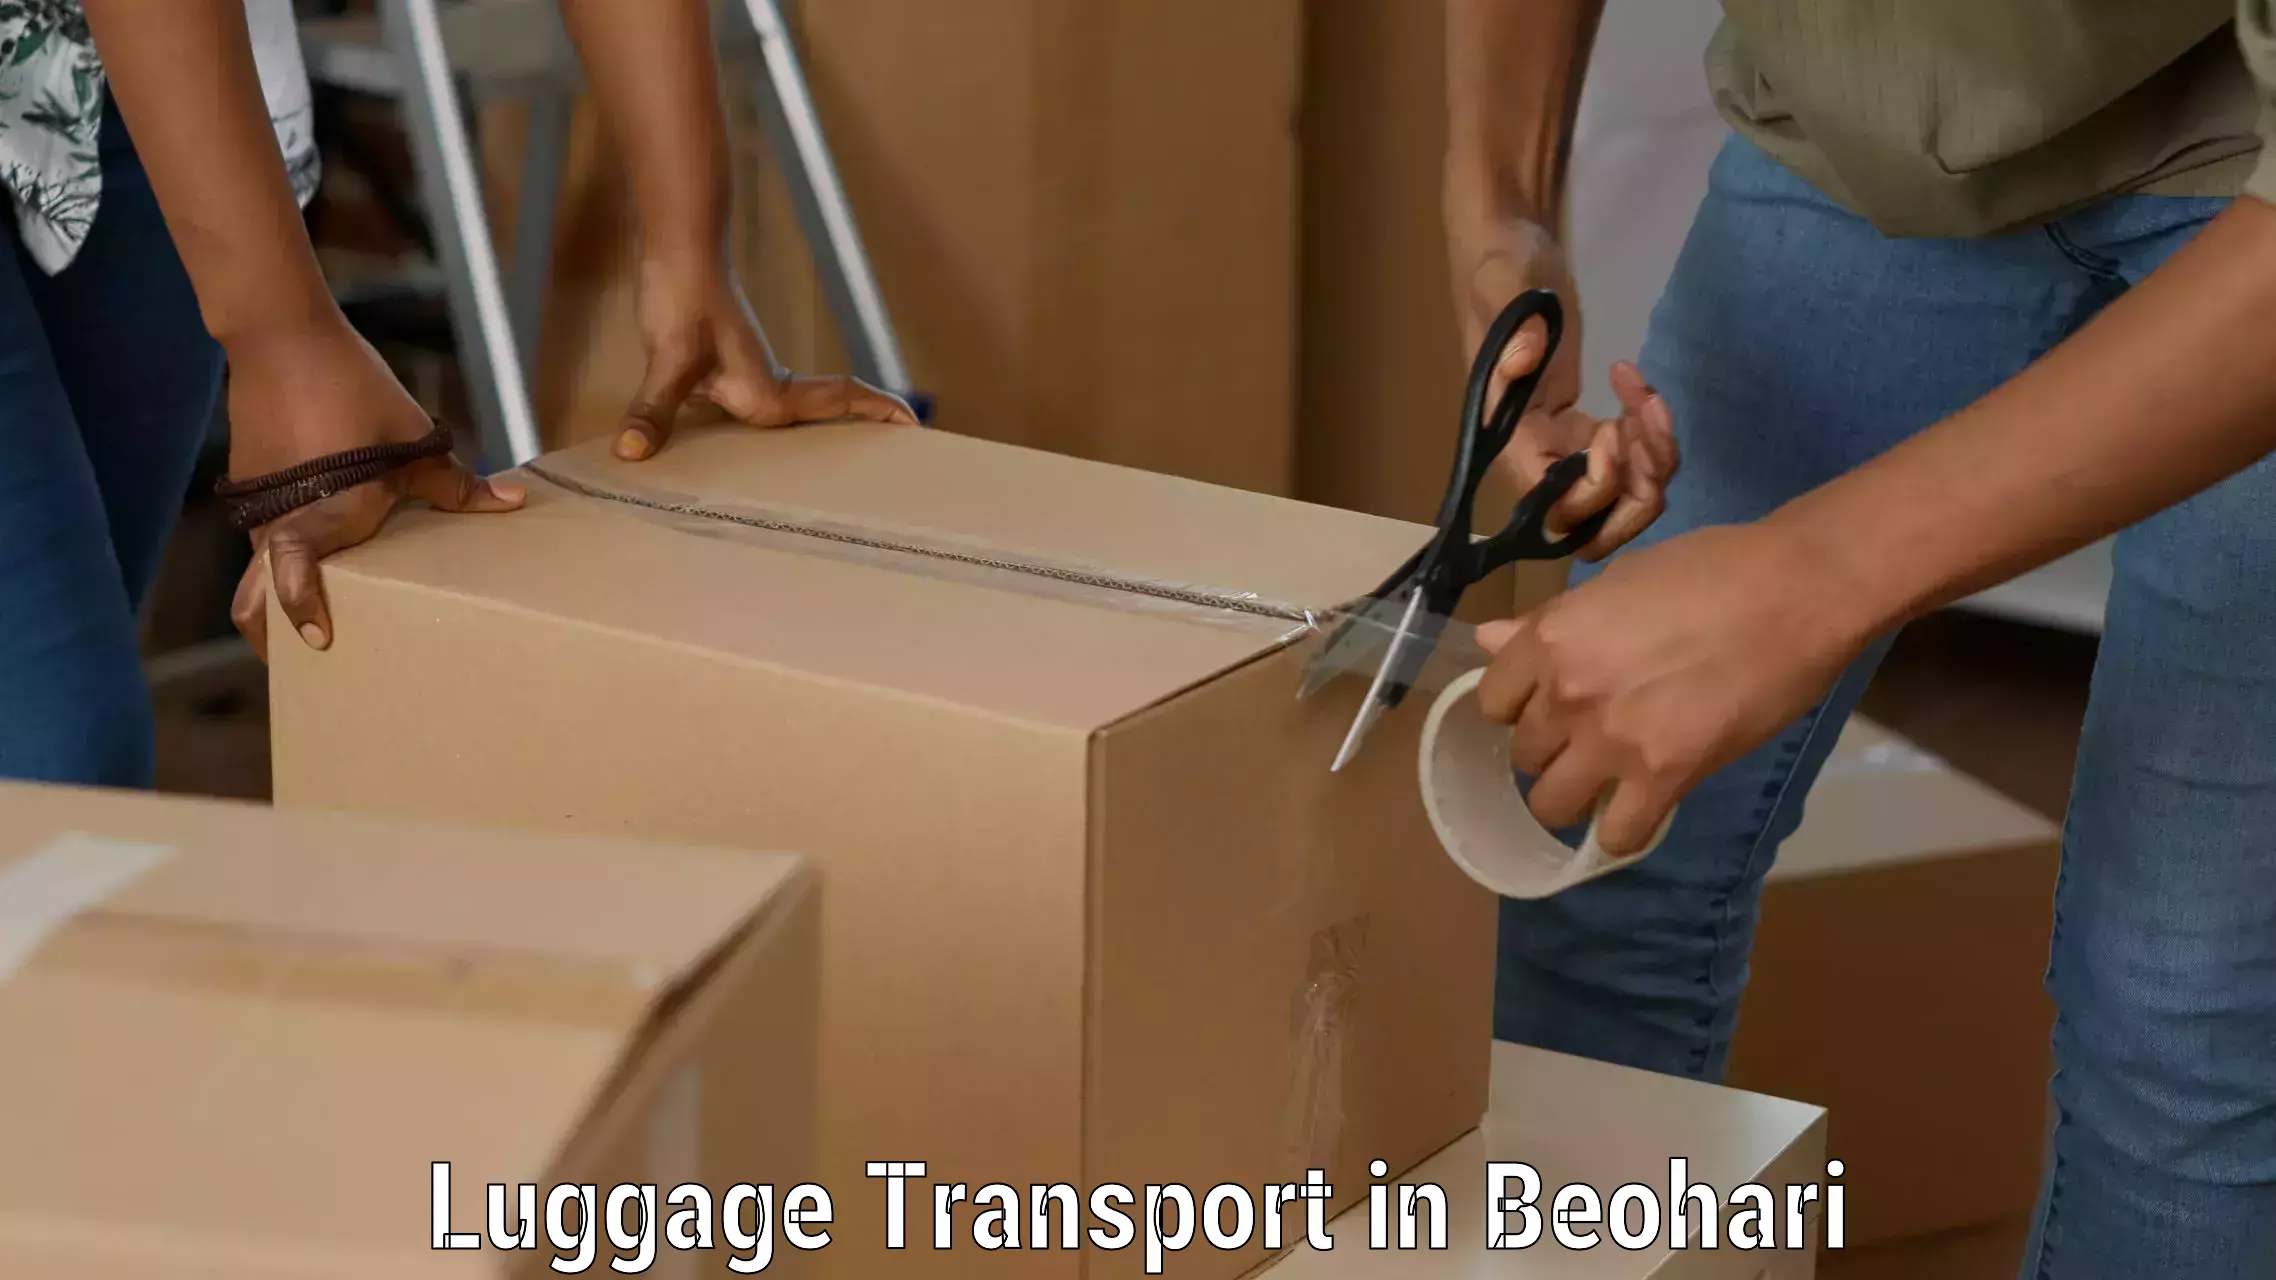 Luggage transport consulting in Beohari